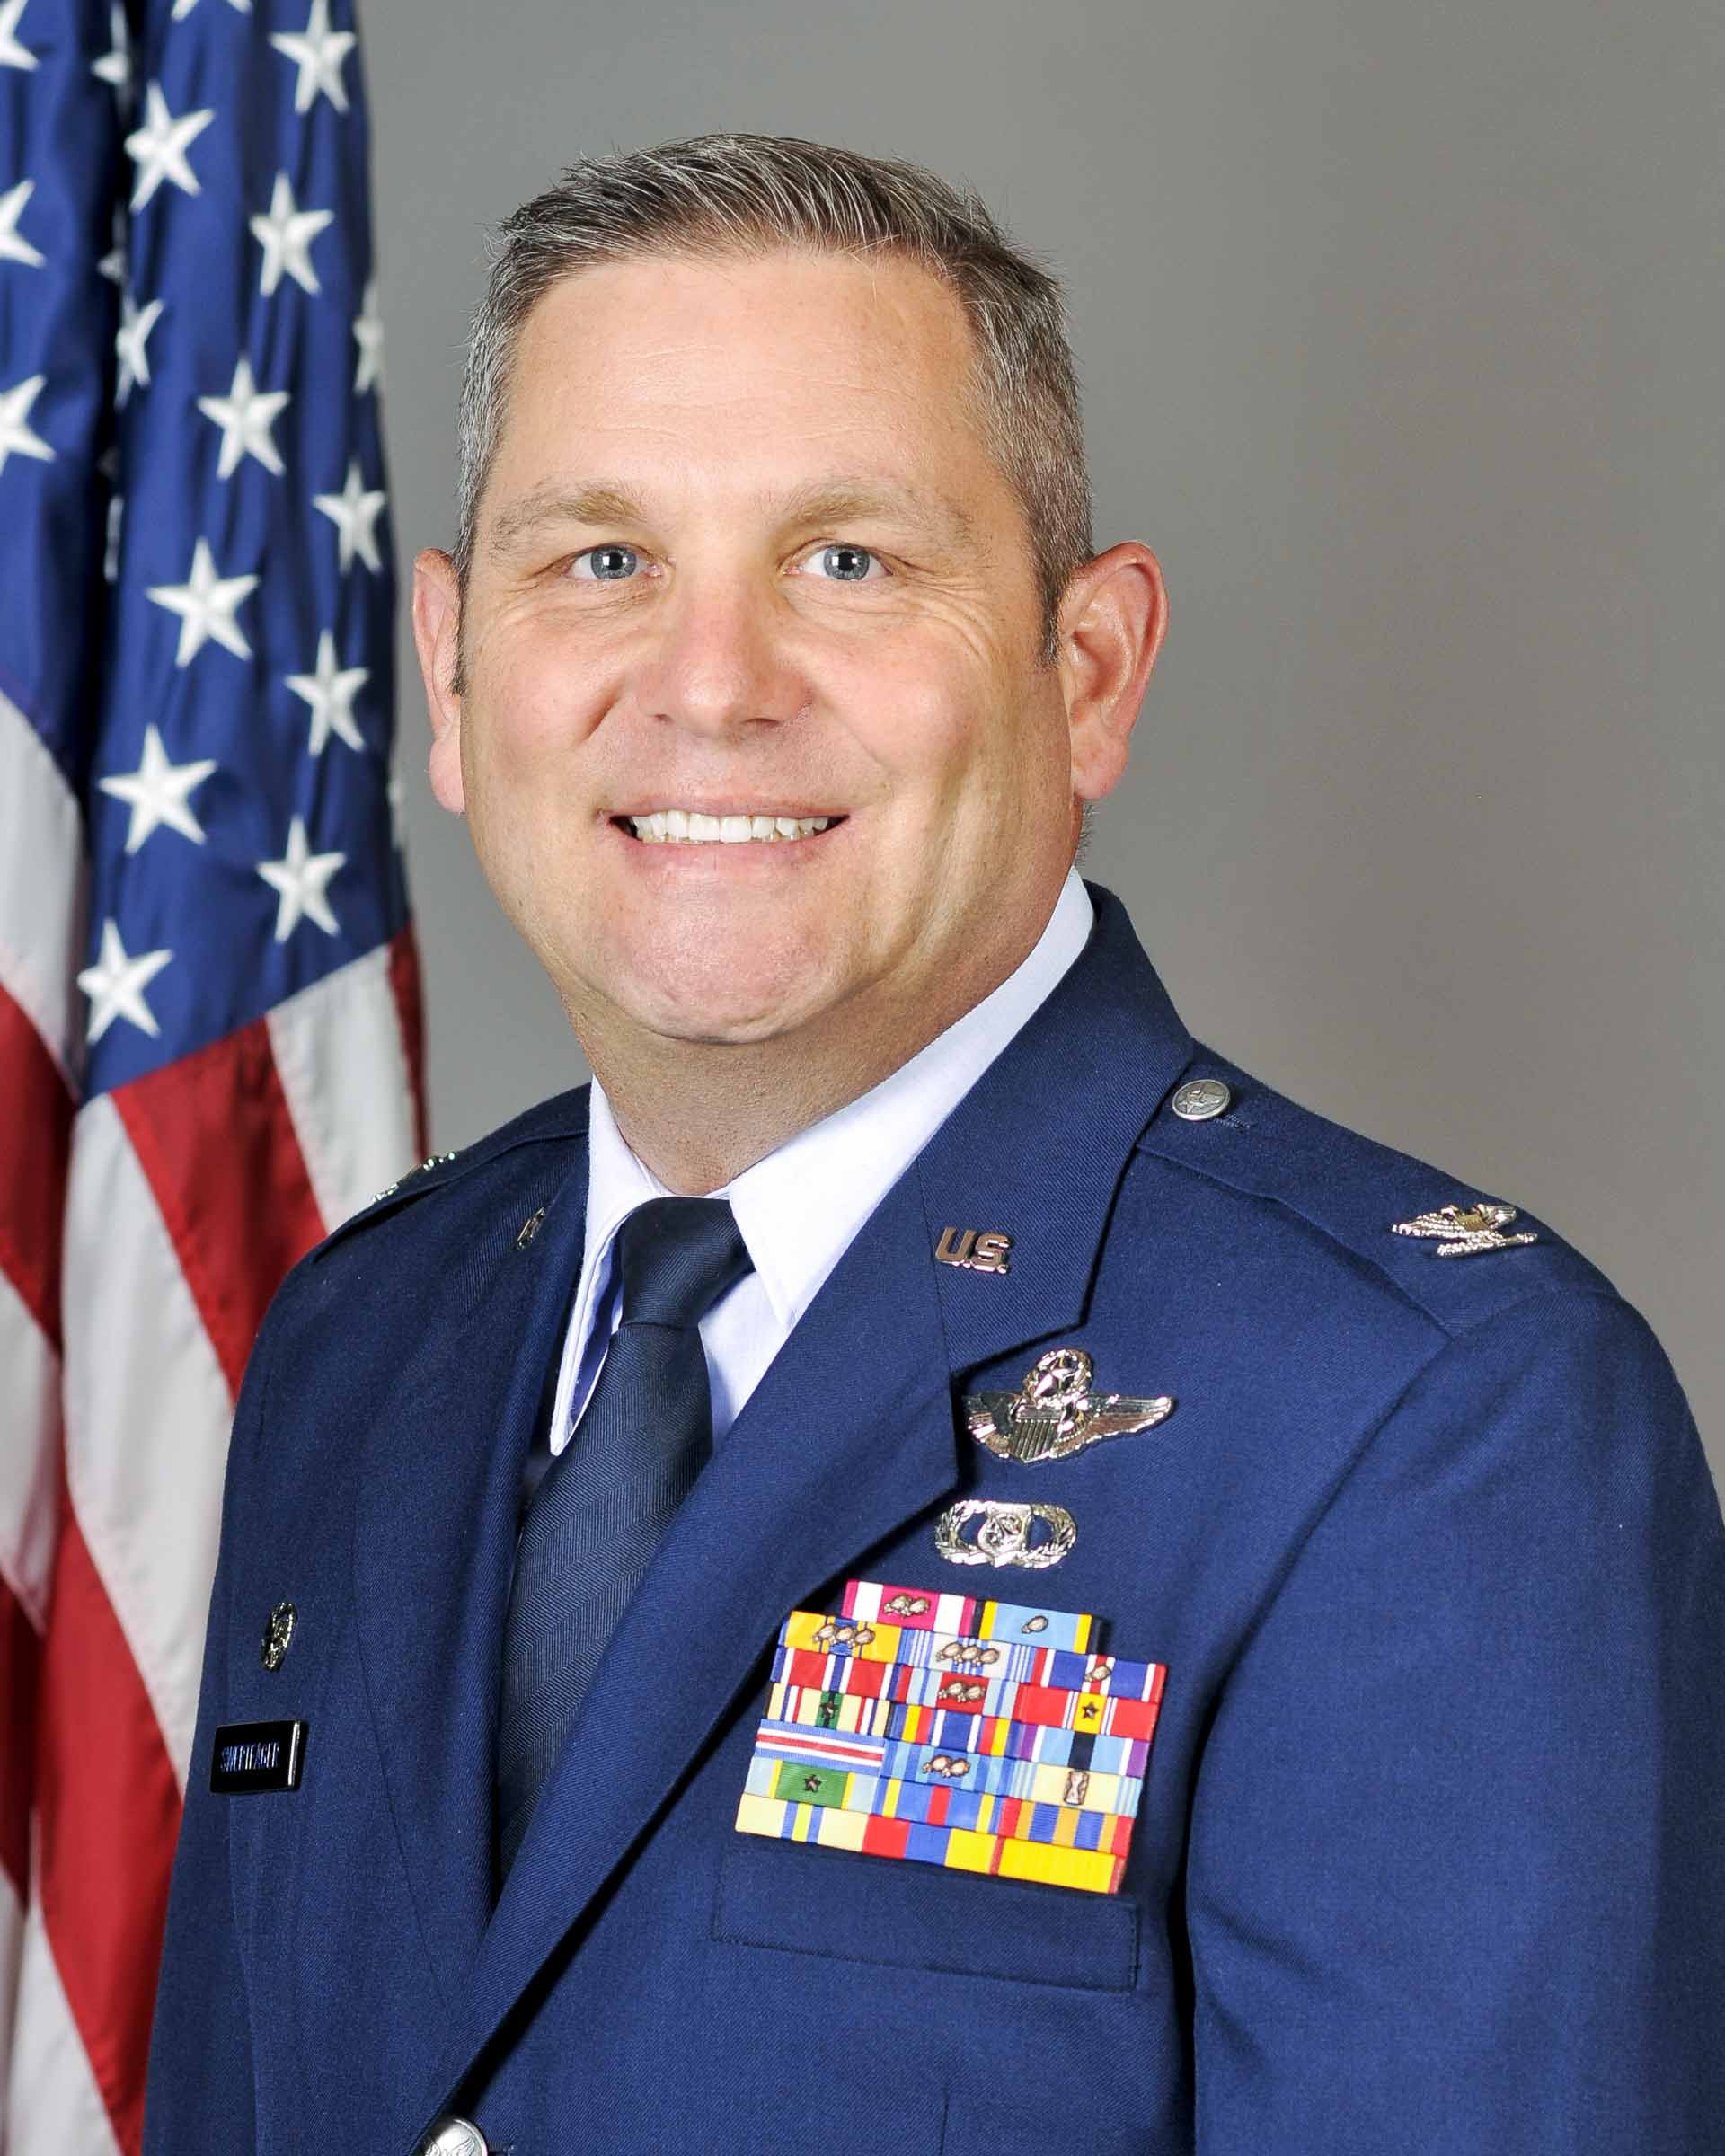 Col. Swertfager